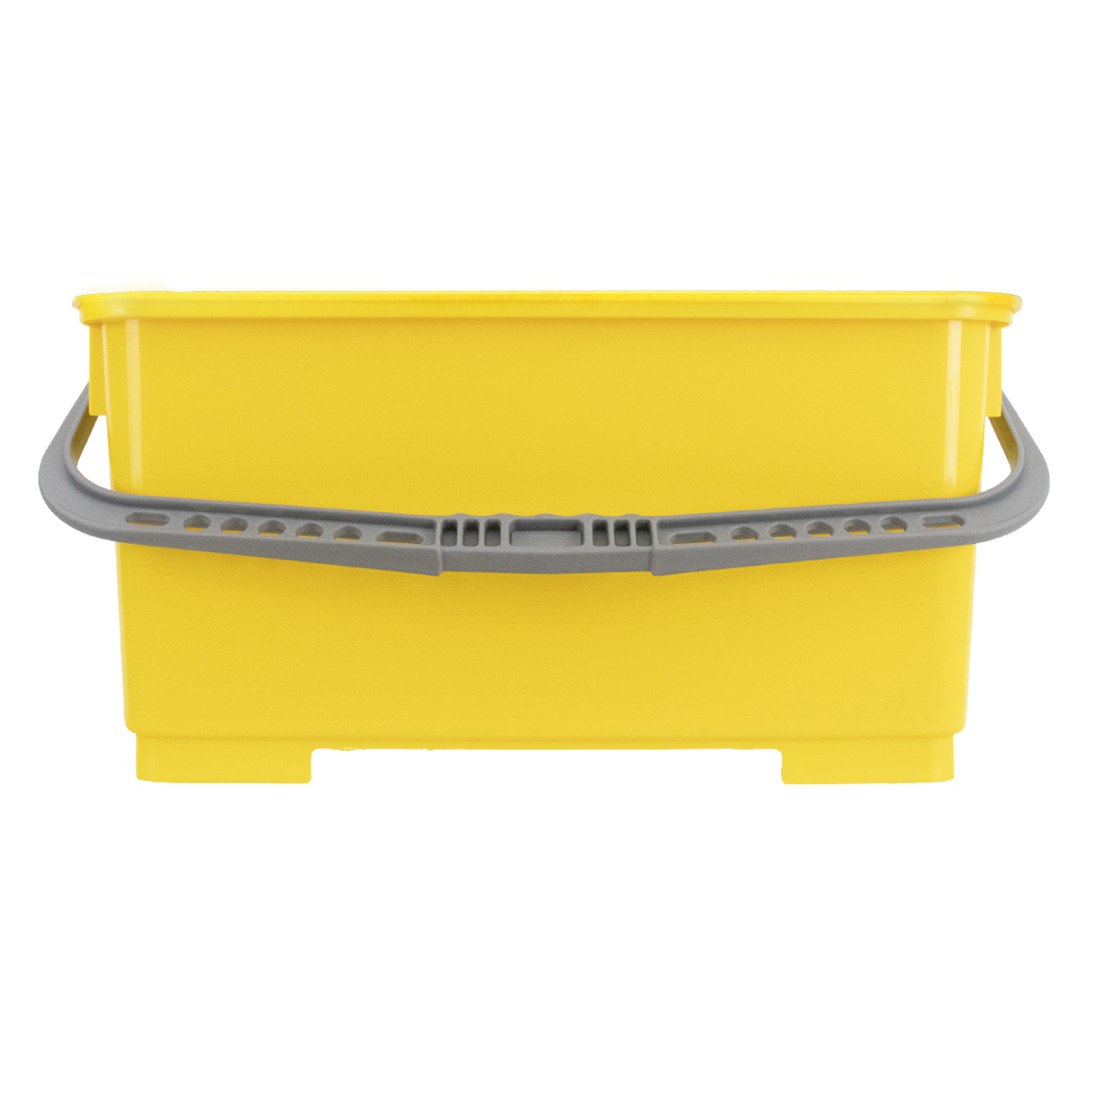 Pulex Bucket Yellow Front View